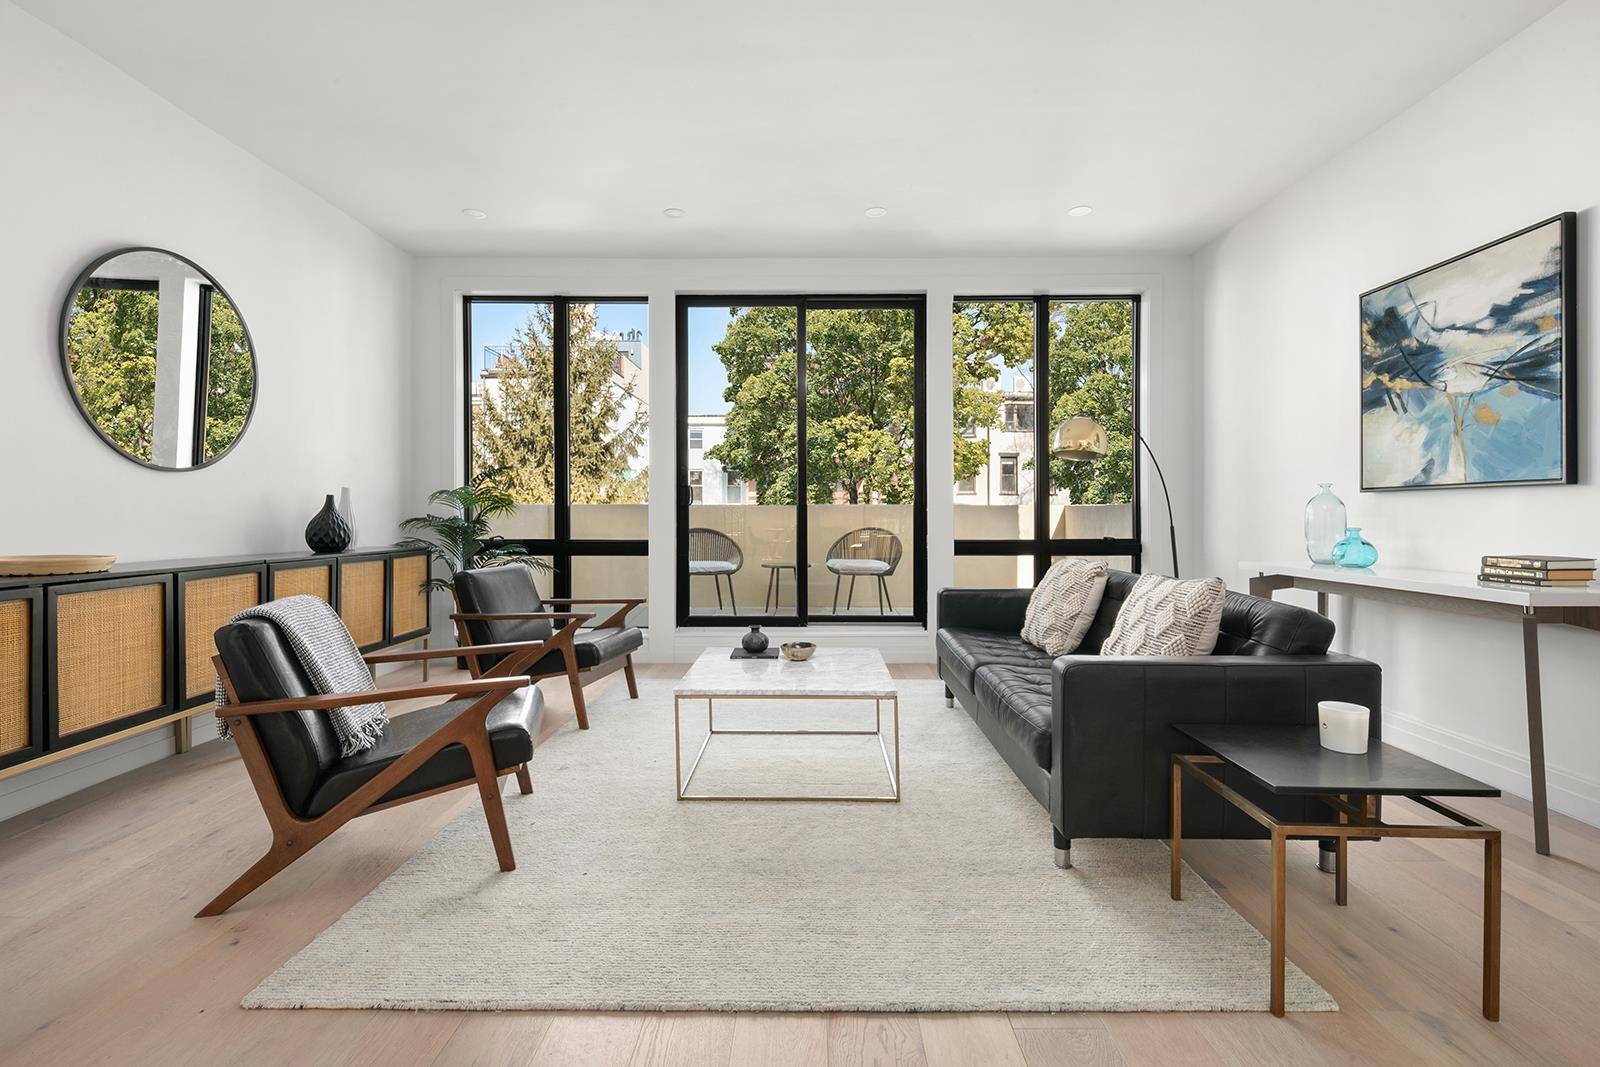 Welcome to Residence 2 at 381 Bergen Street, a luxurious and newly renovated condominium nestled in the heart of Park Slope.